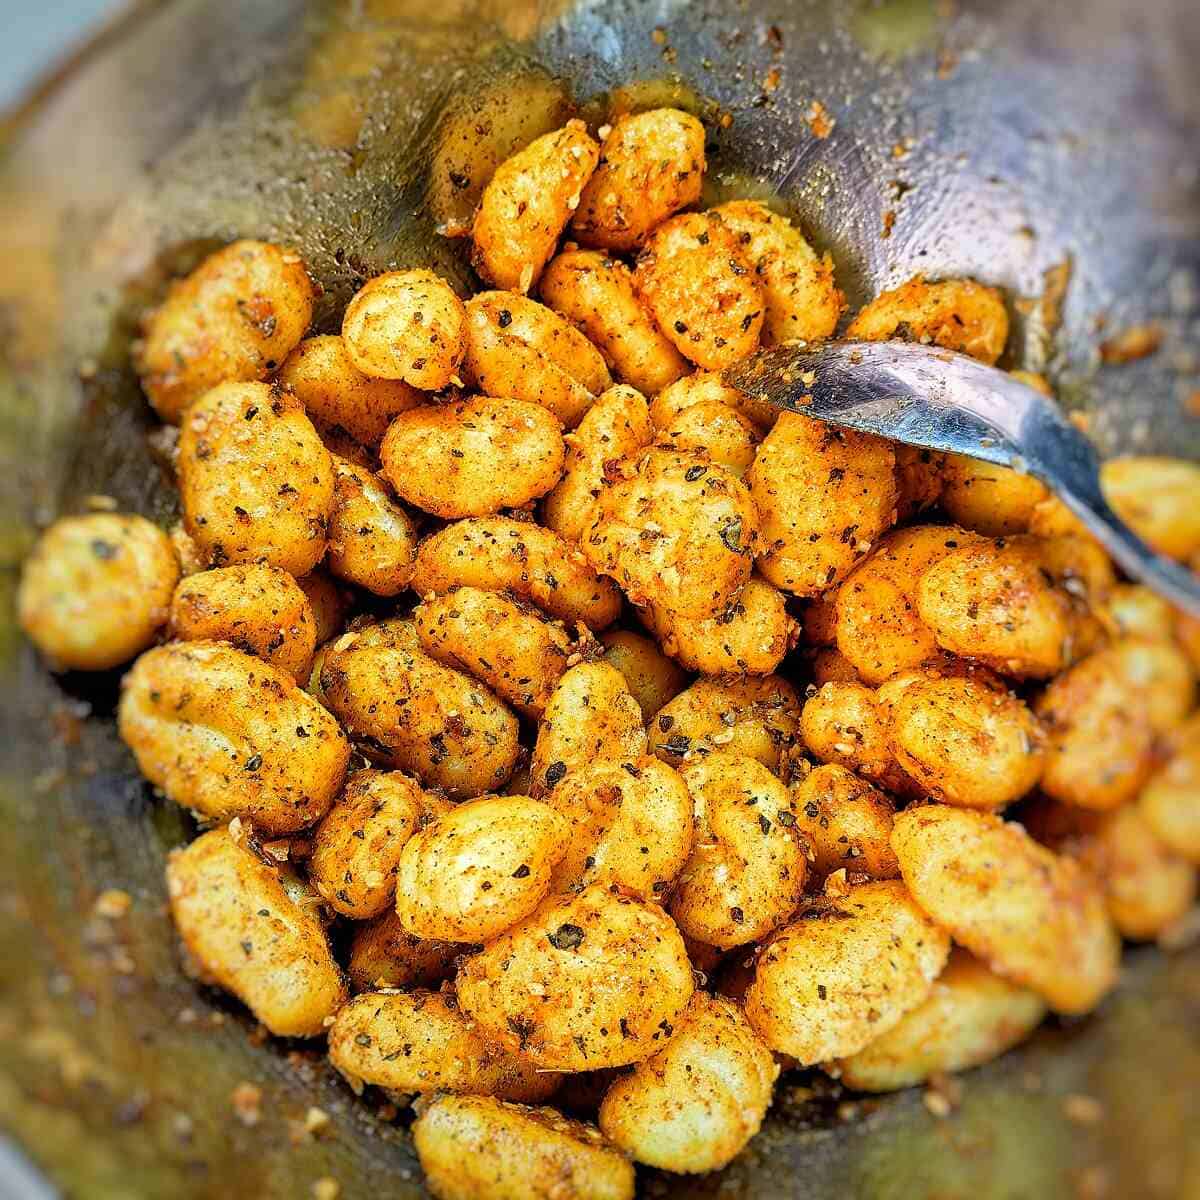 gnocchi coated with mix of spices and herbs